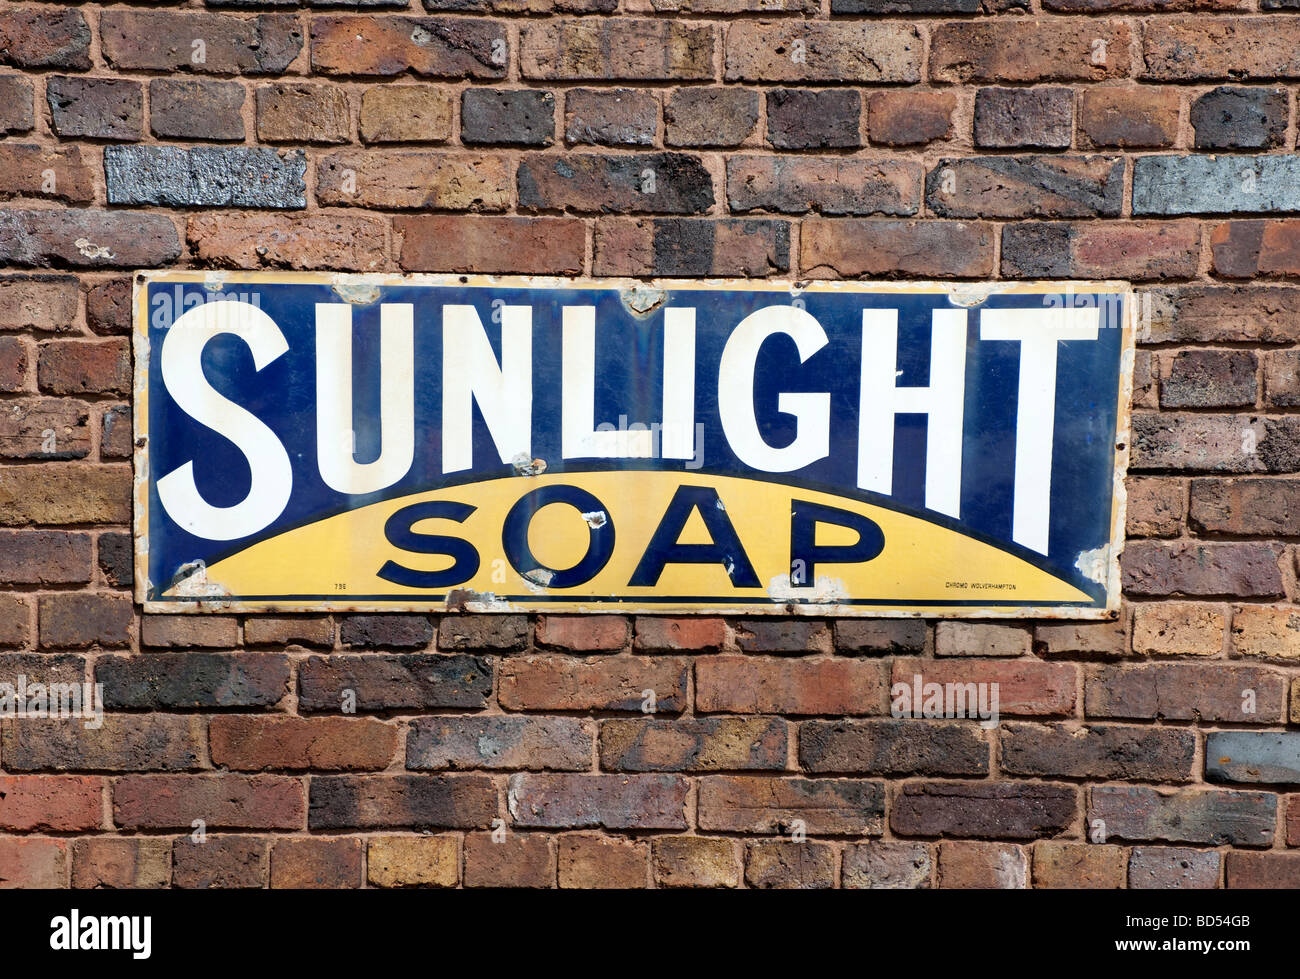 Victorian advertising sign for Sunlight soap Stock Photo